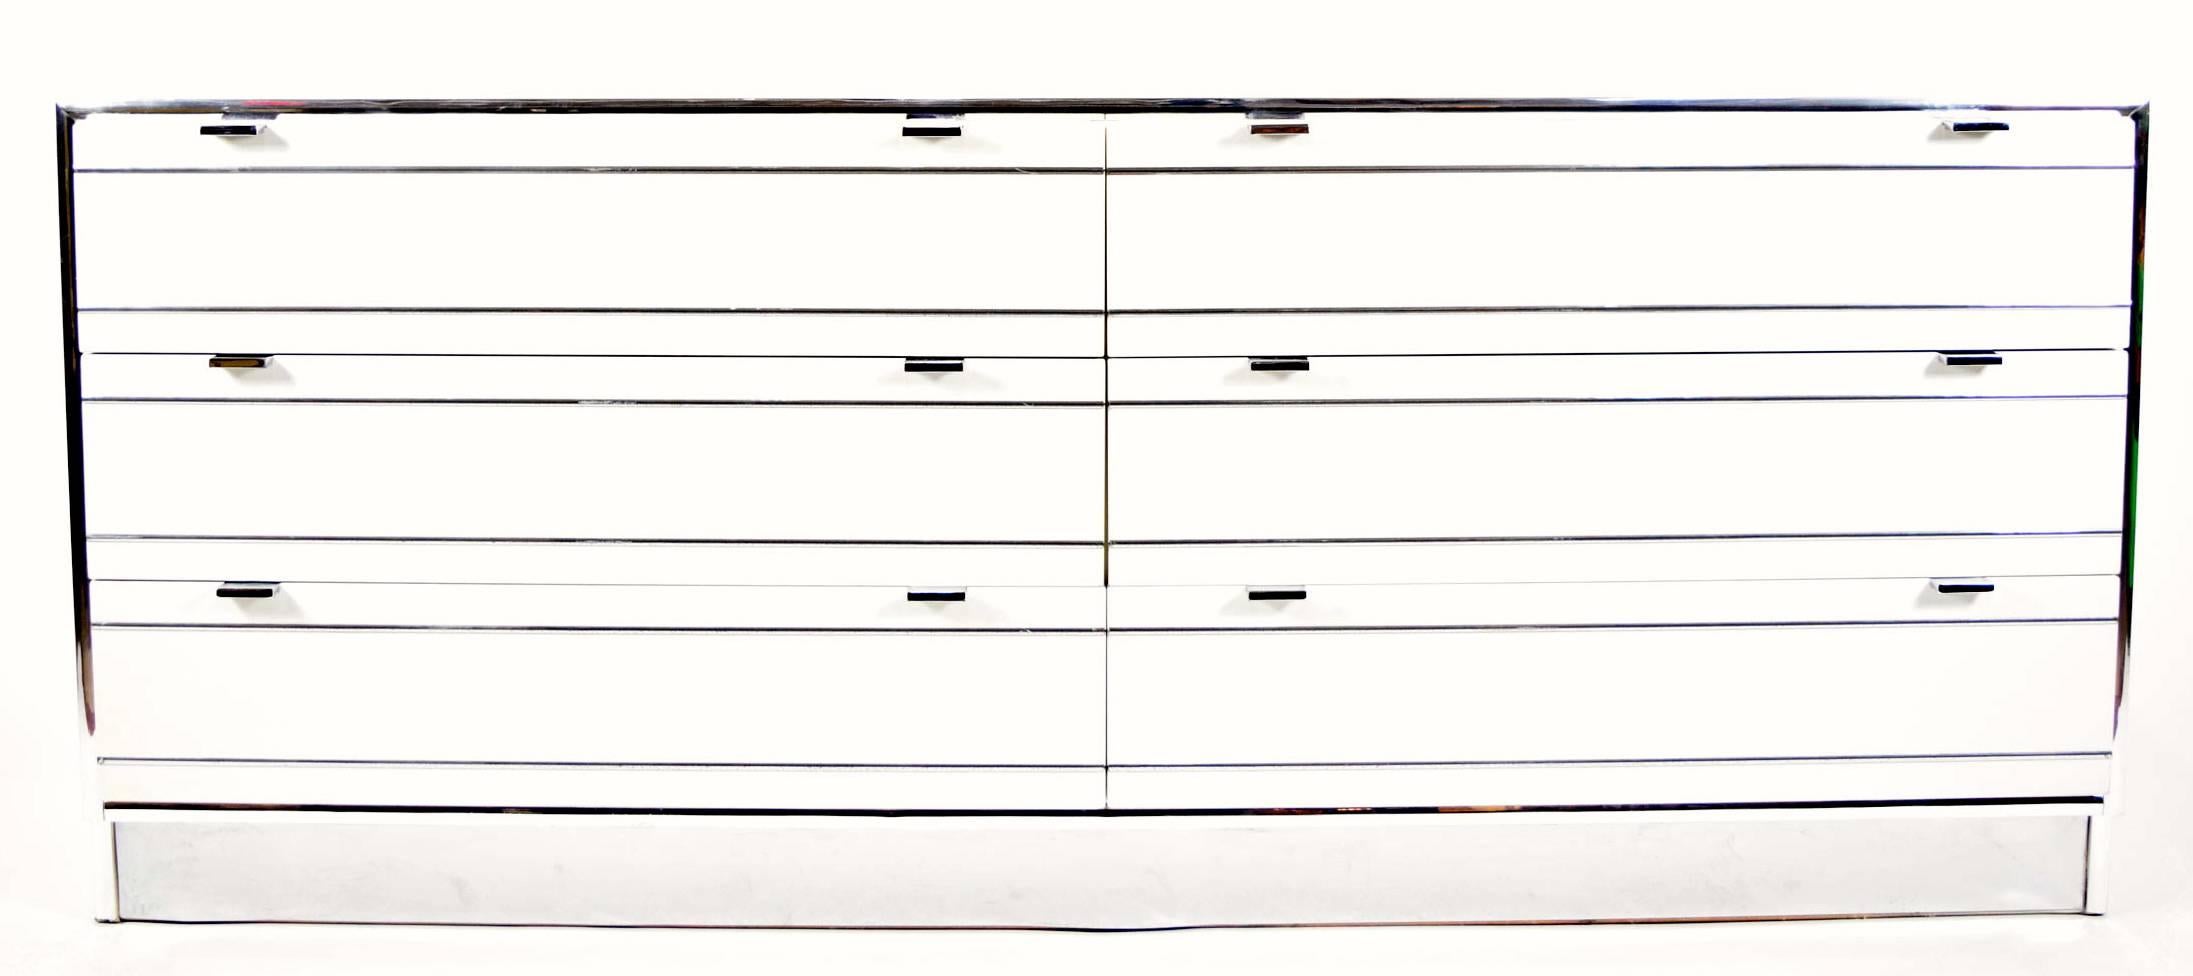 High style Rougier cabinet/dresser in white laminate with chrome accents and trim. Six drawers in dresser. 